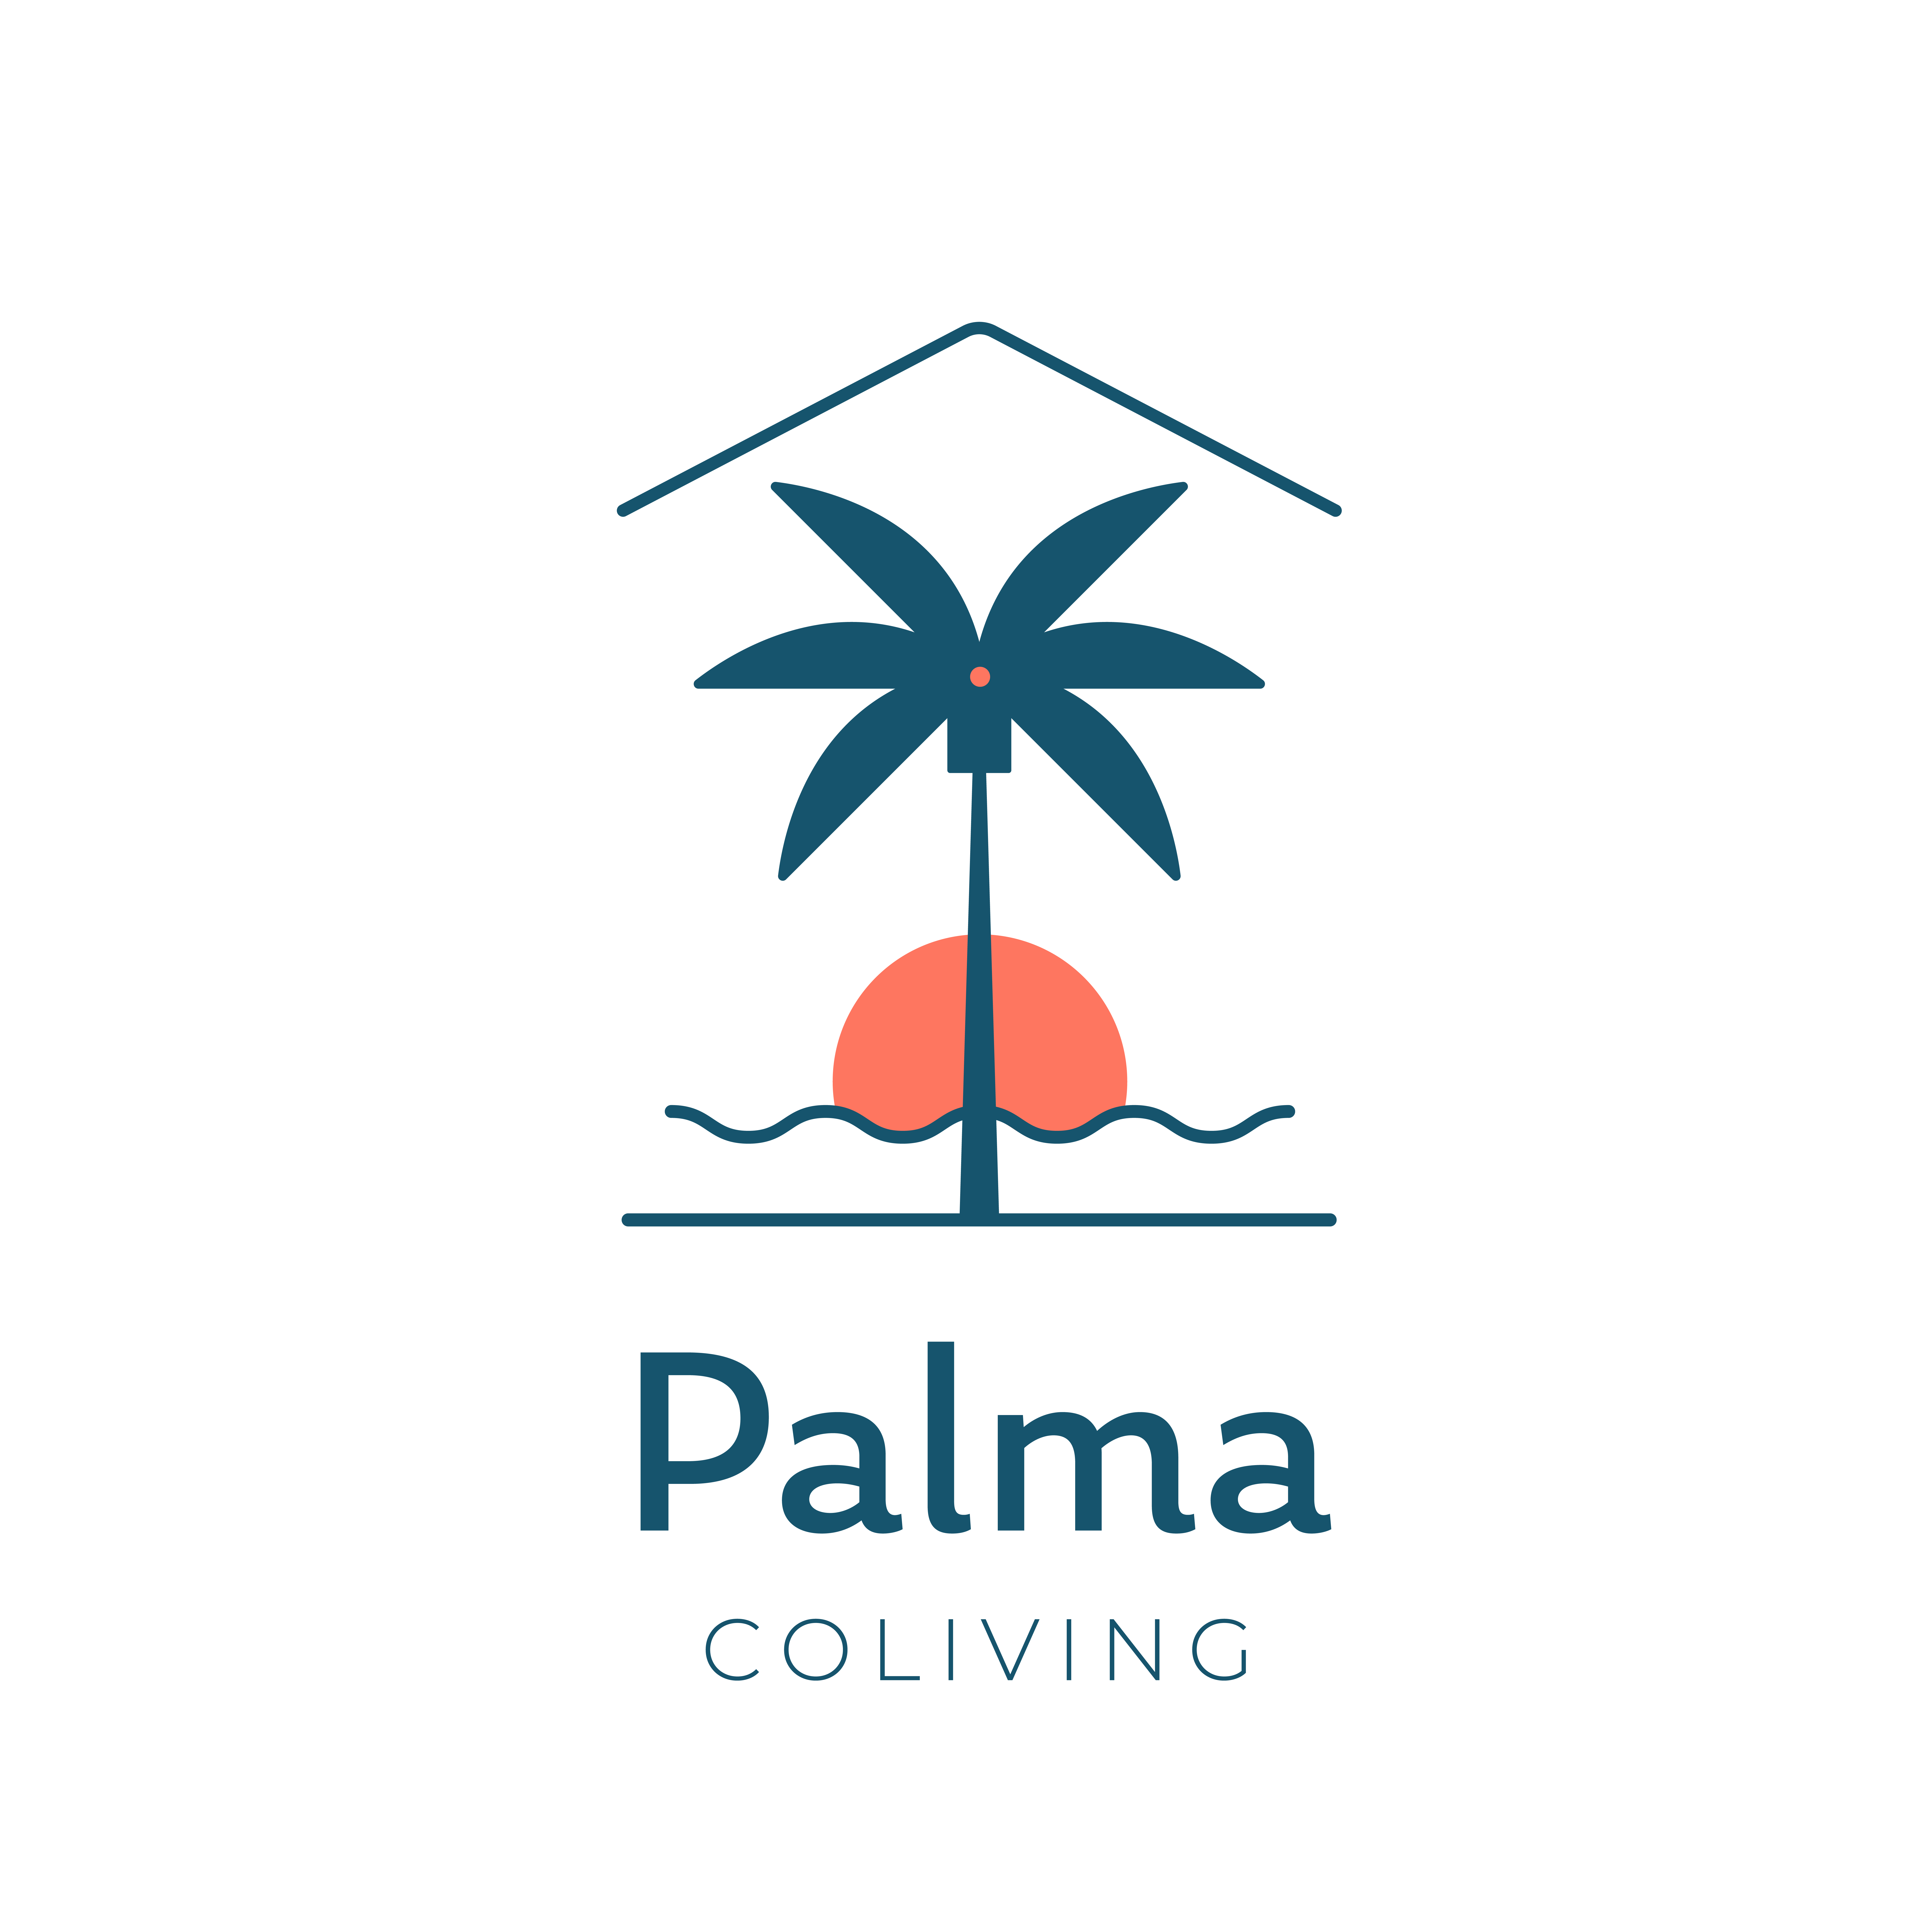 Coliving project example: Palma Coliving